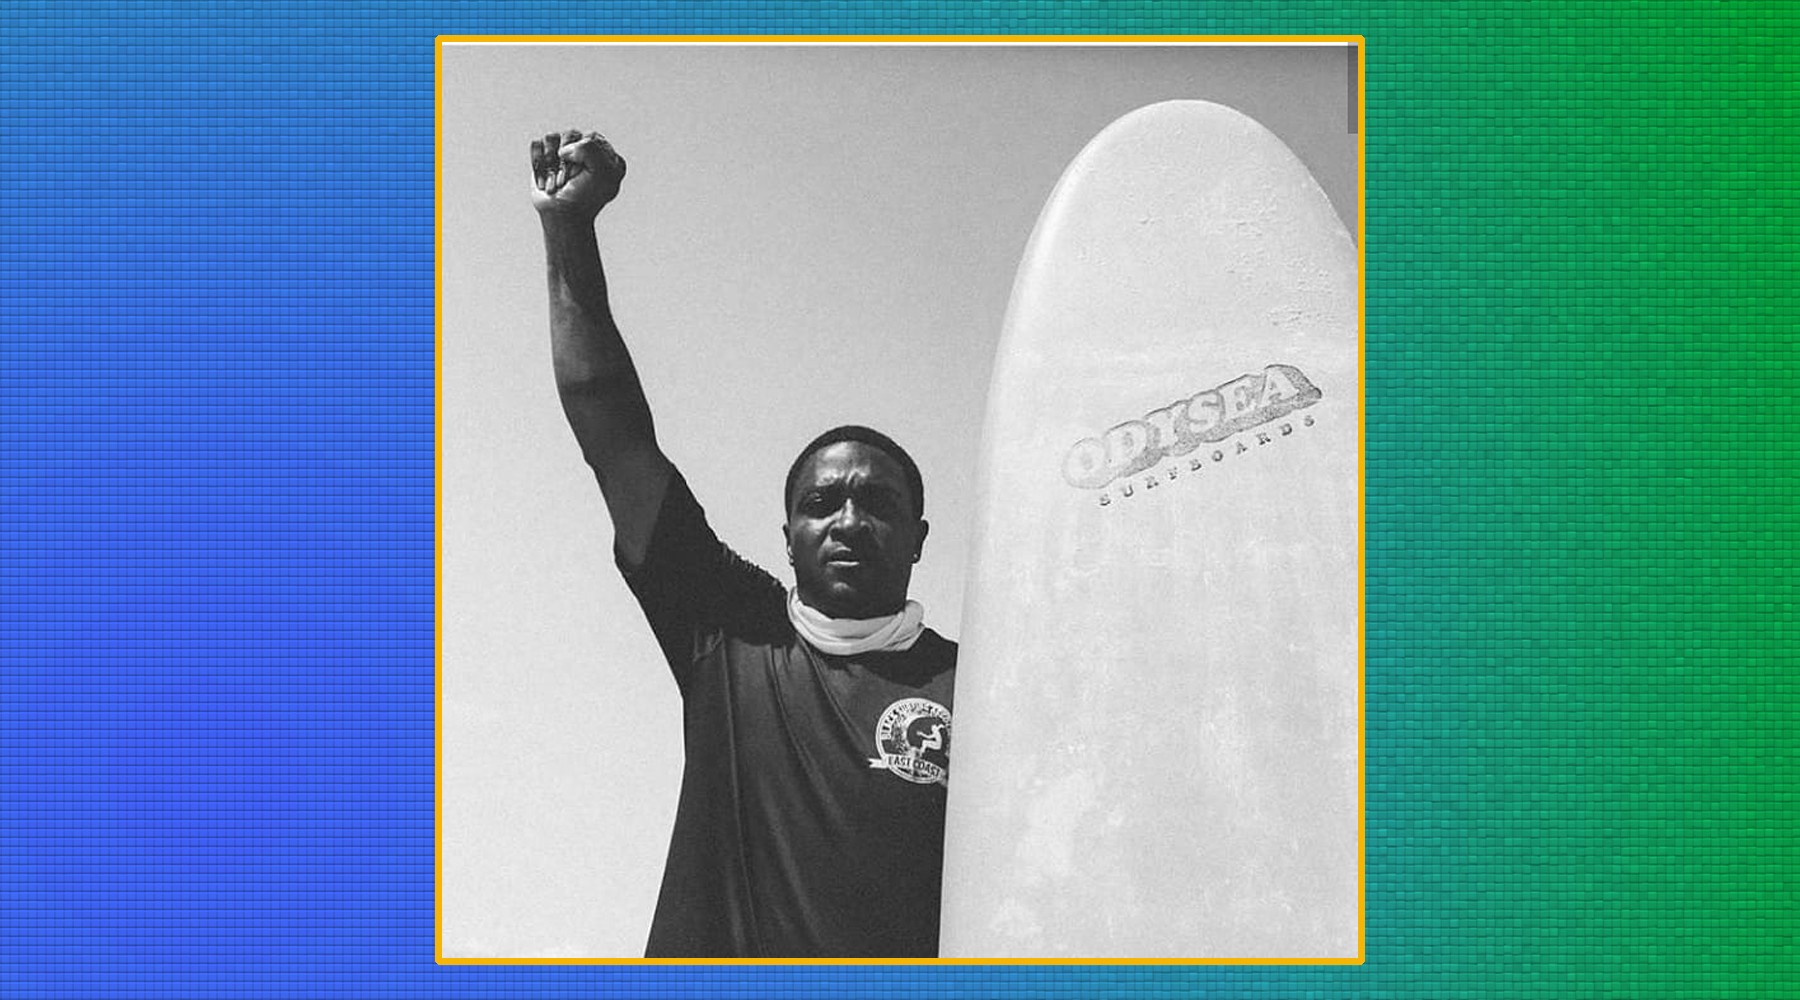 6 Black Surfers Throughout History That You Should Know About - Blavity